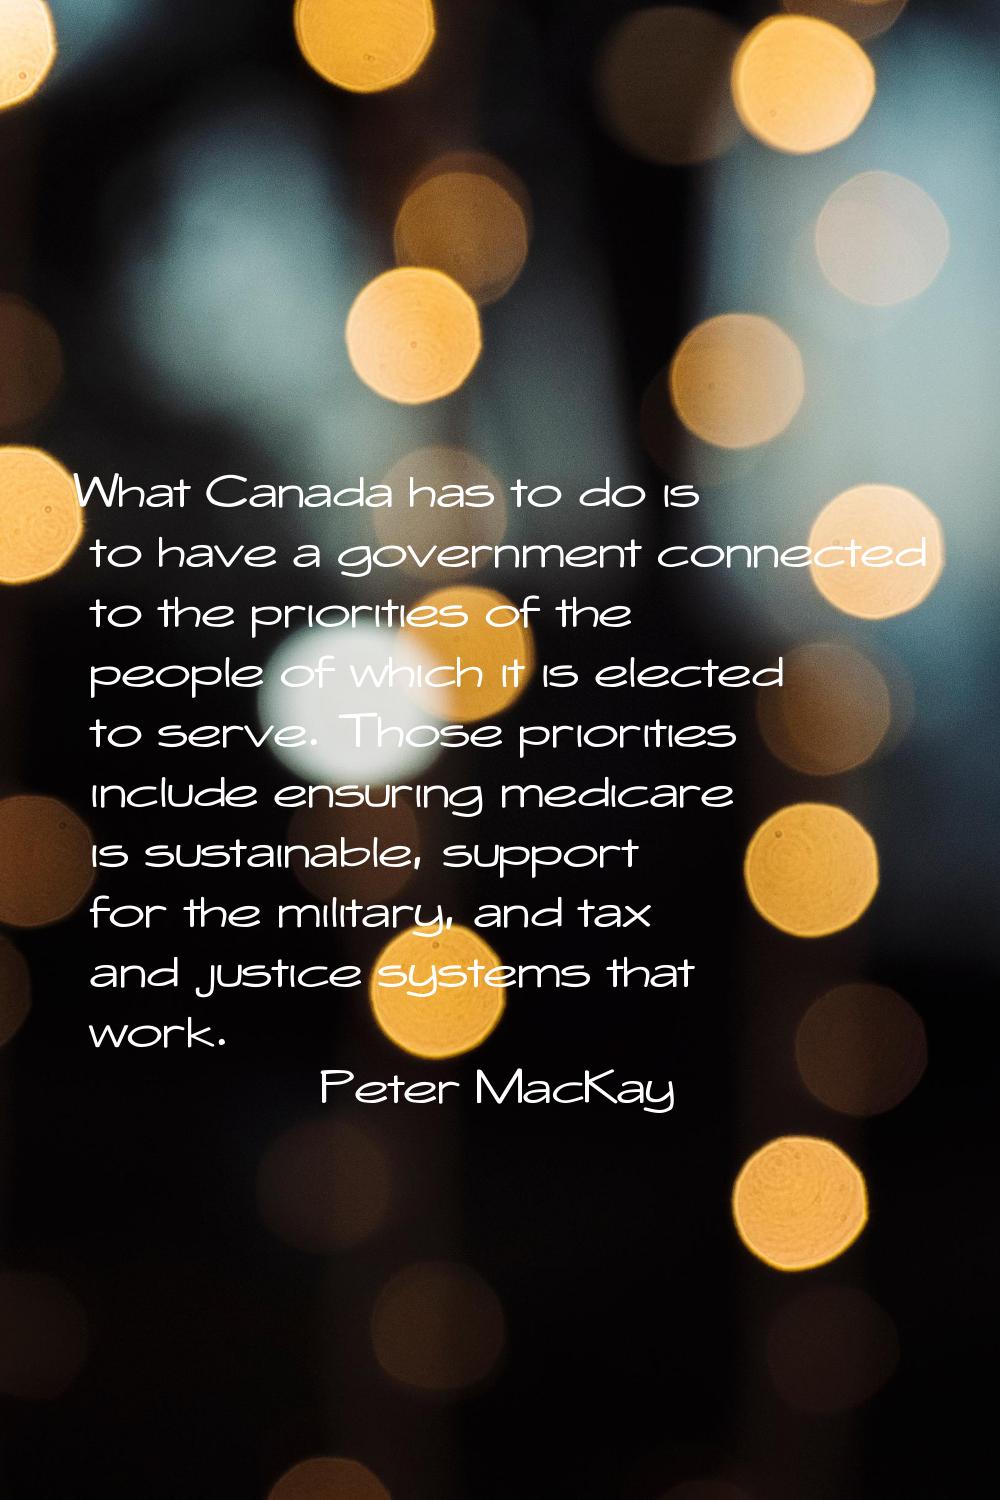 What Canada has to do is to have a government connected to the priorities of the people of which it